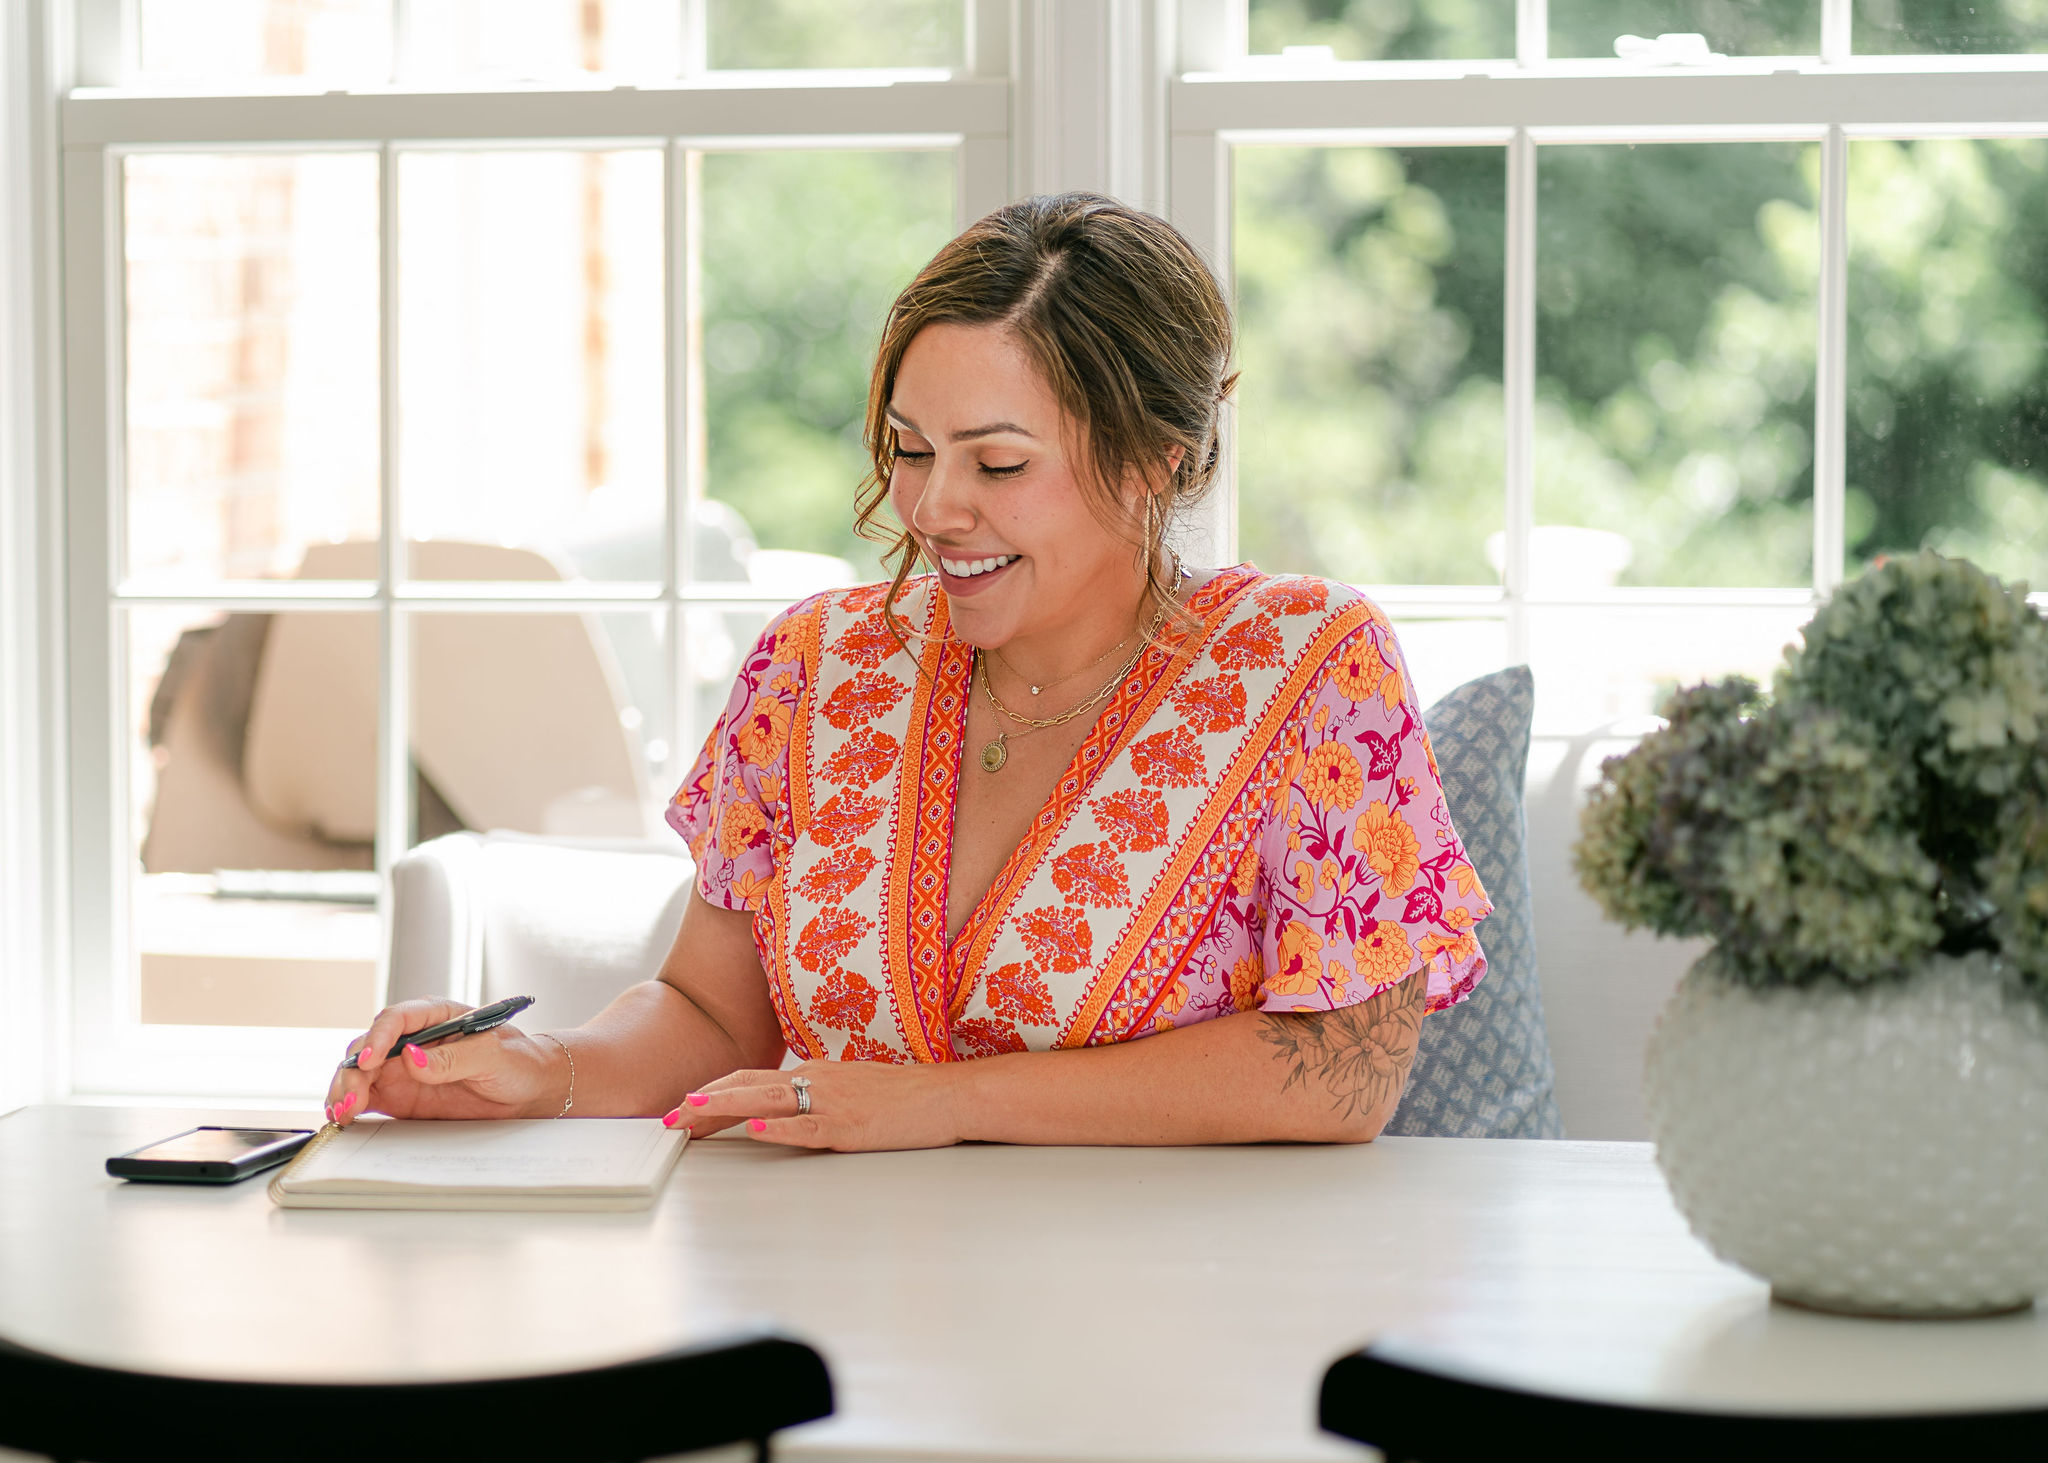 woman at white kitchen table writing in a journal and smiling